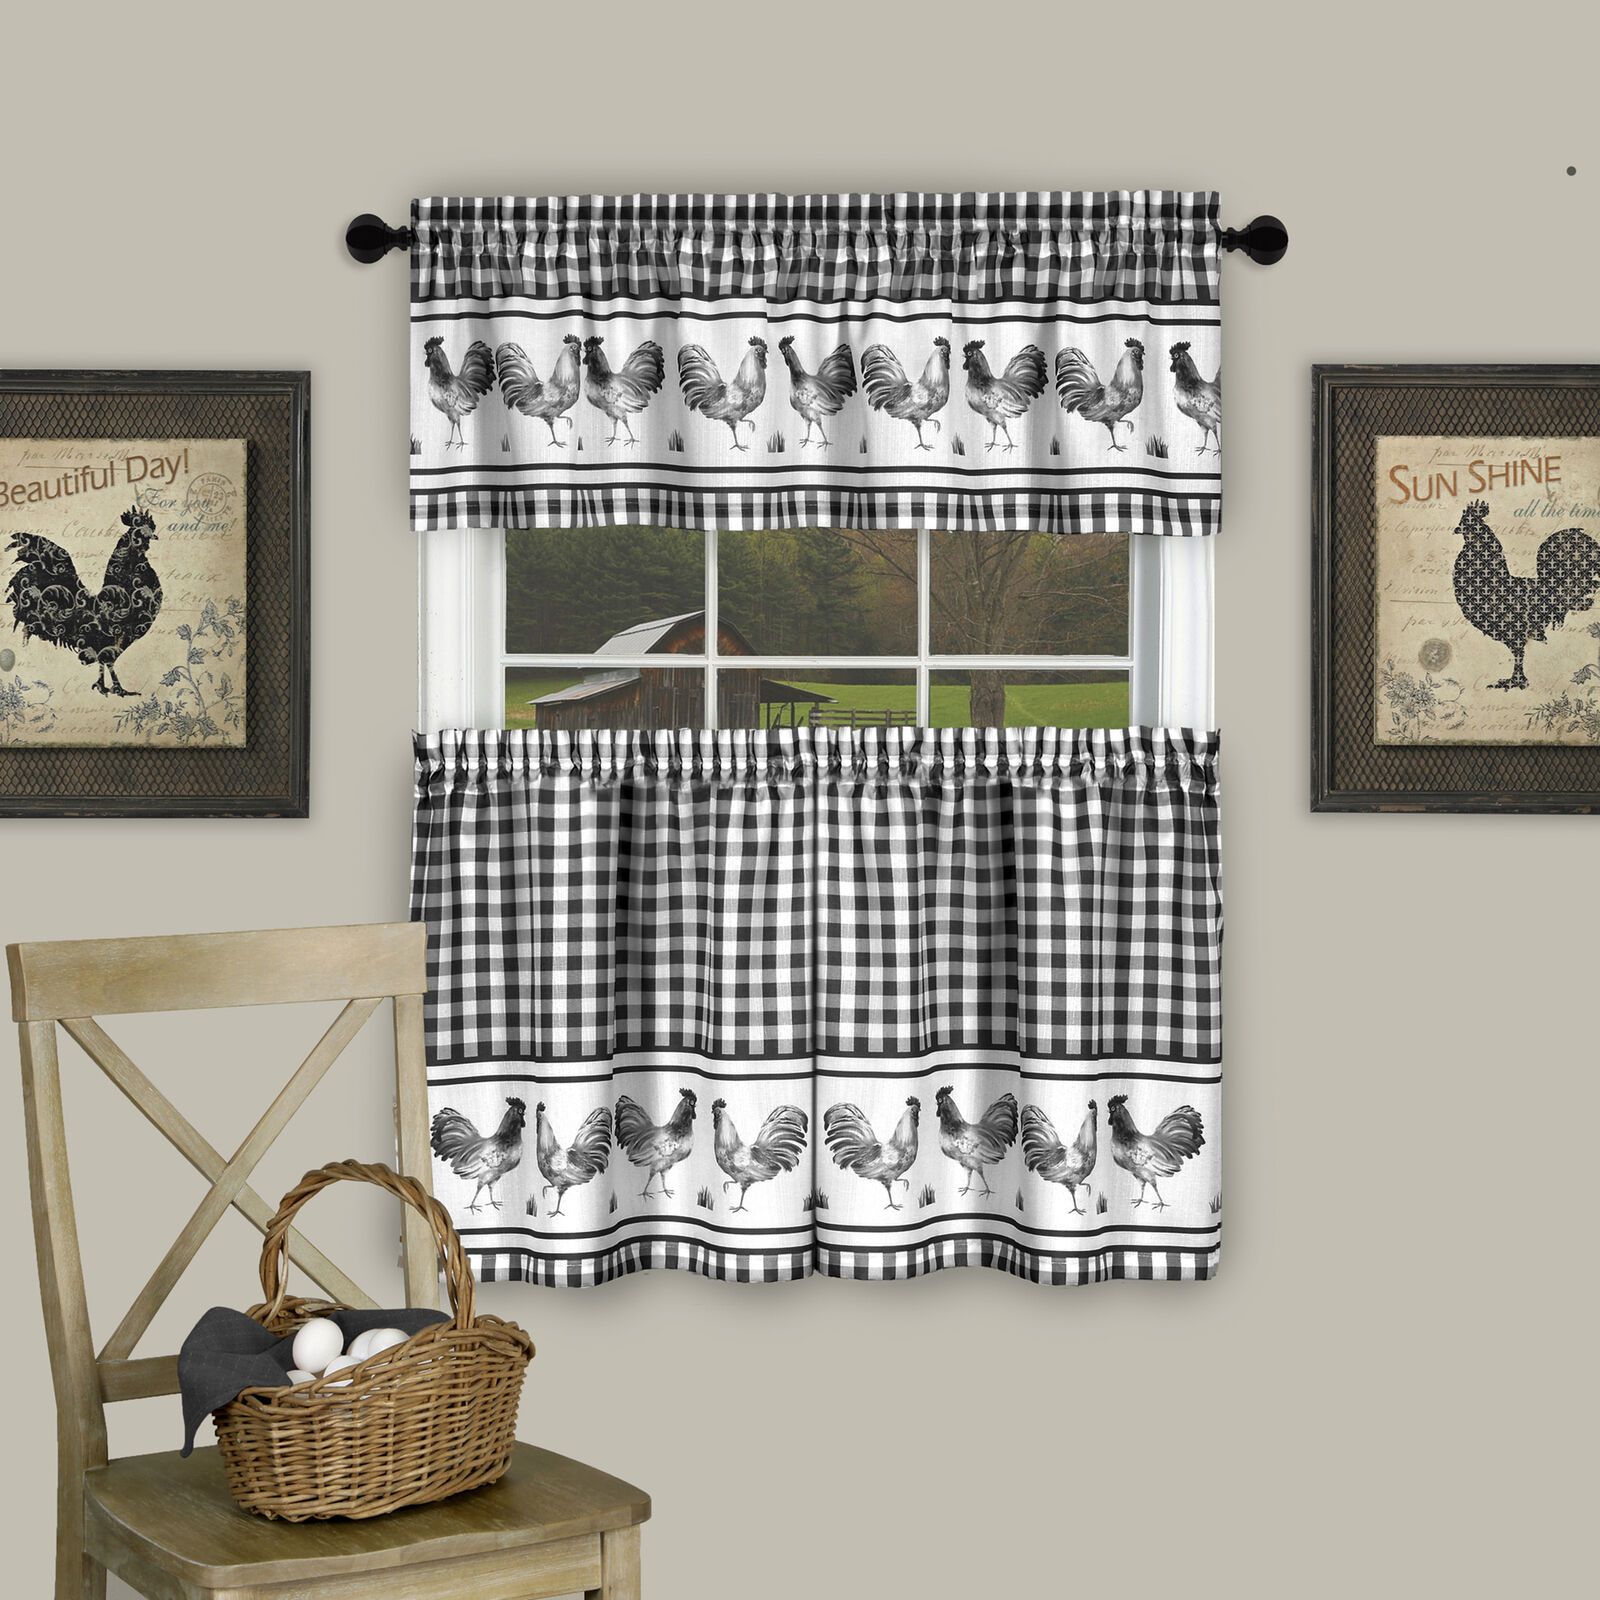 3pc Kitchen Curtain Set, Check Gingham Plaid Rooster, Tier Panels And  Valance Regarding Live, Love, Laugh Window Curtain Tier Pair And Valance Sets (View 3 of 20)